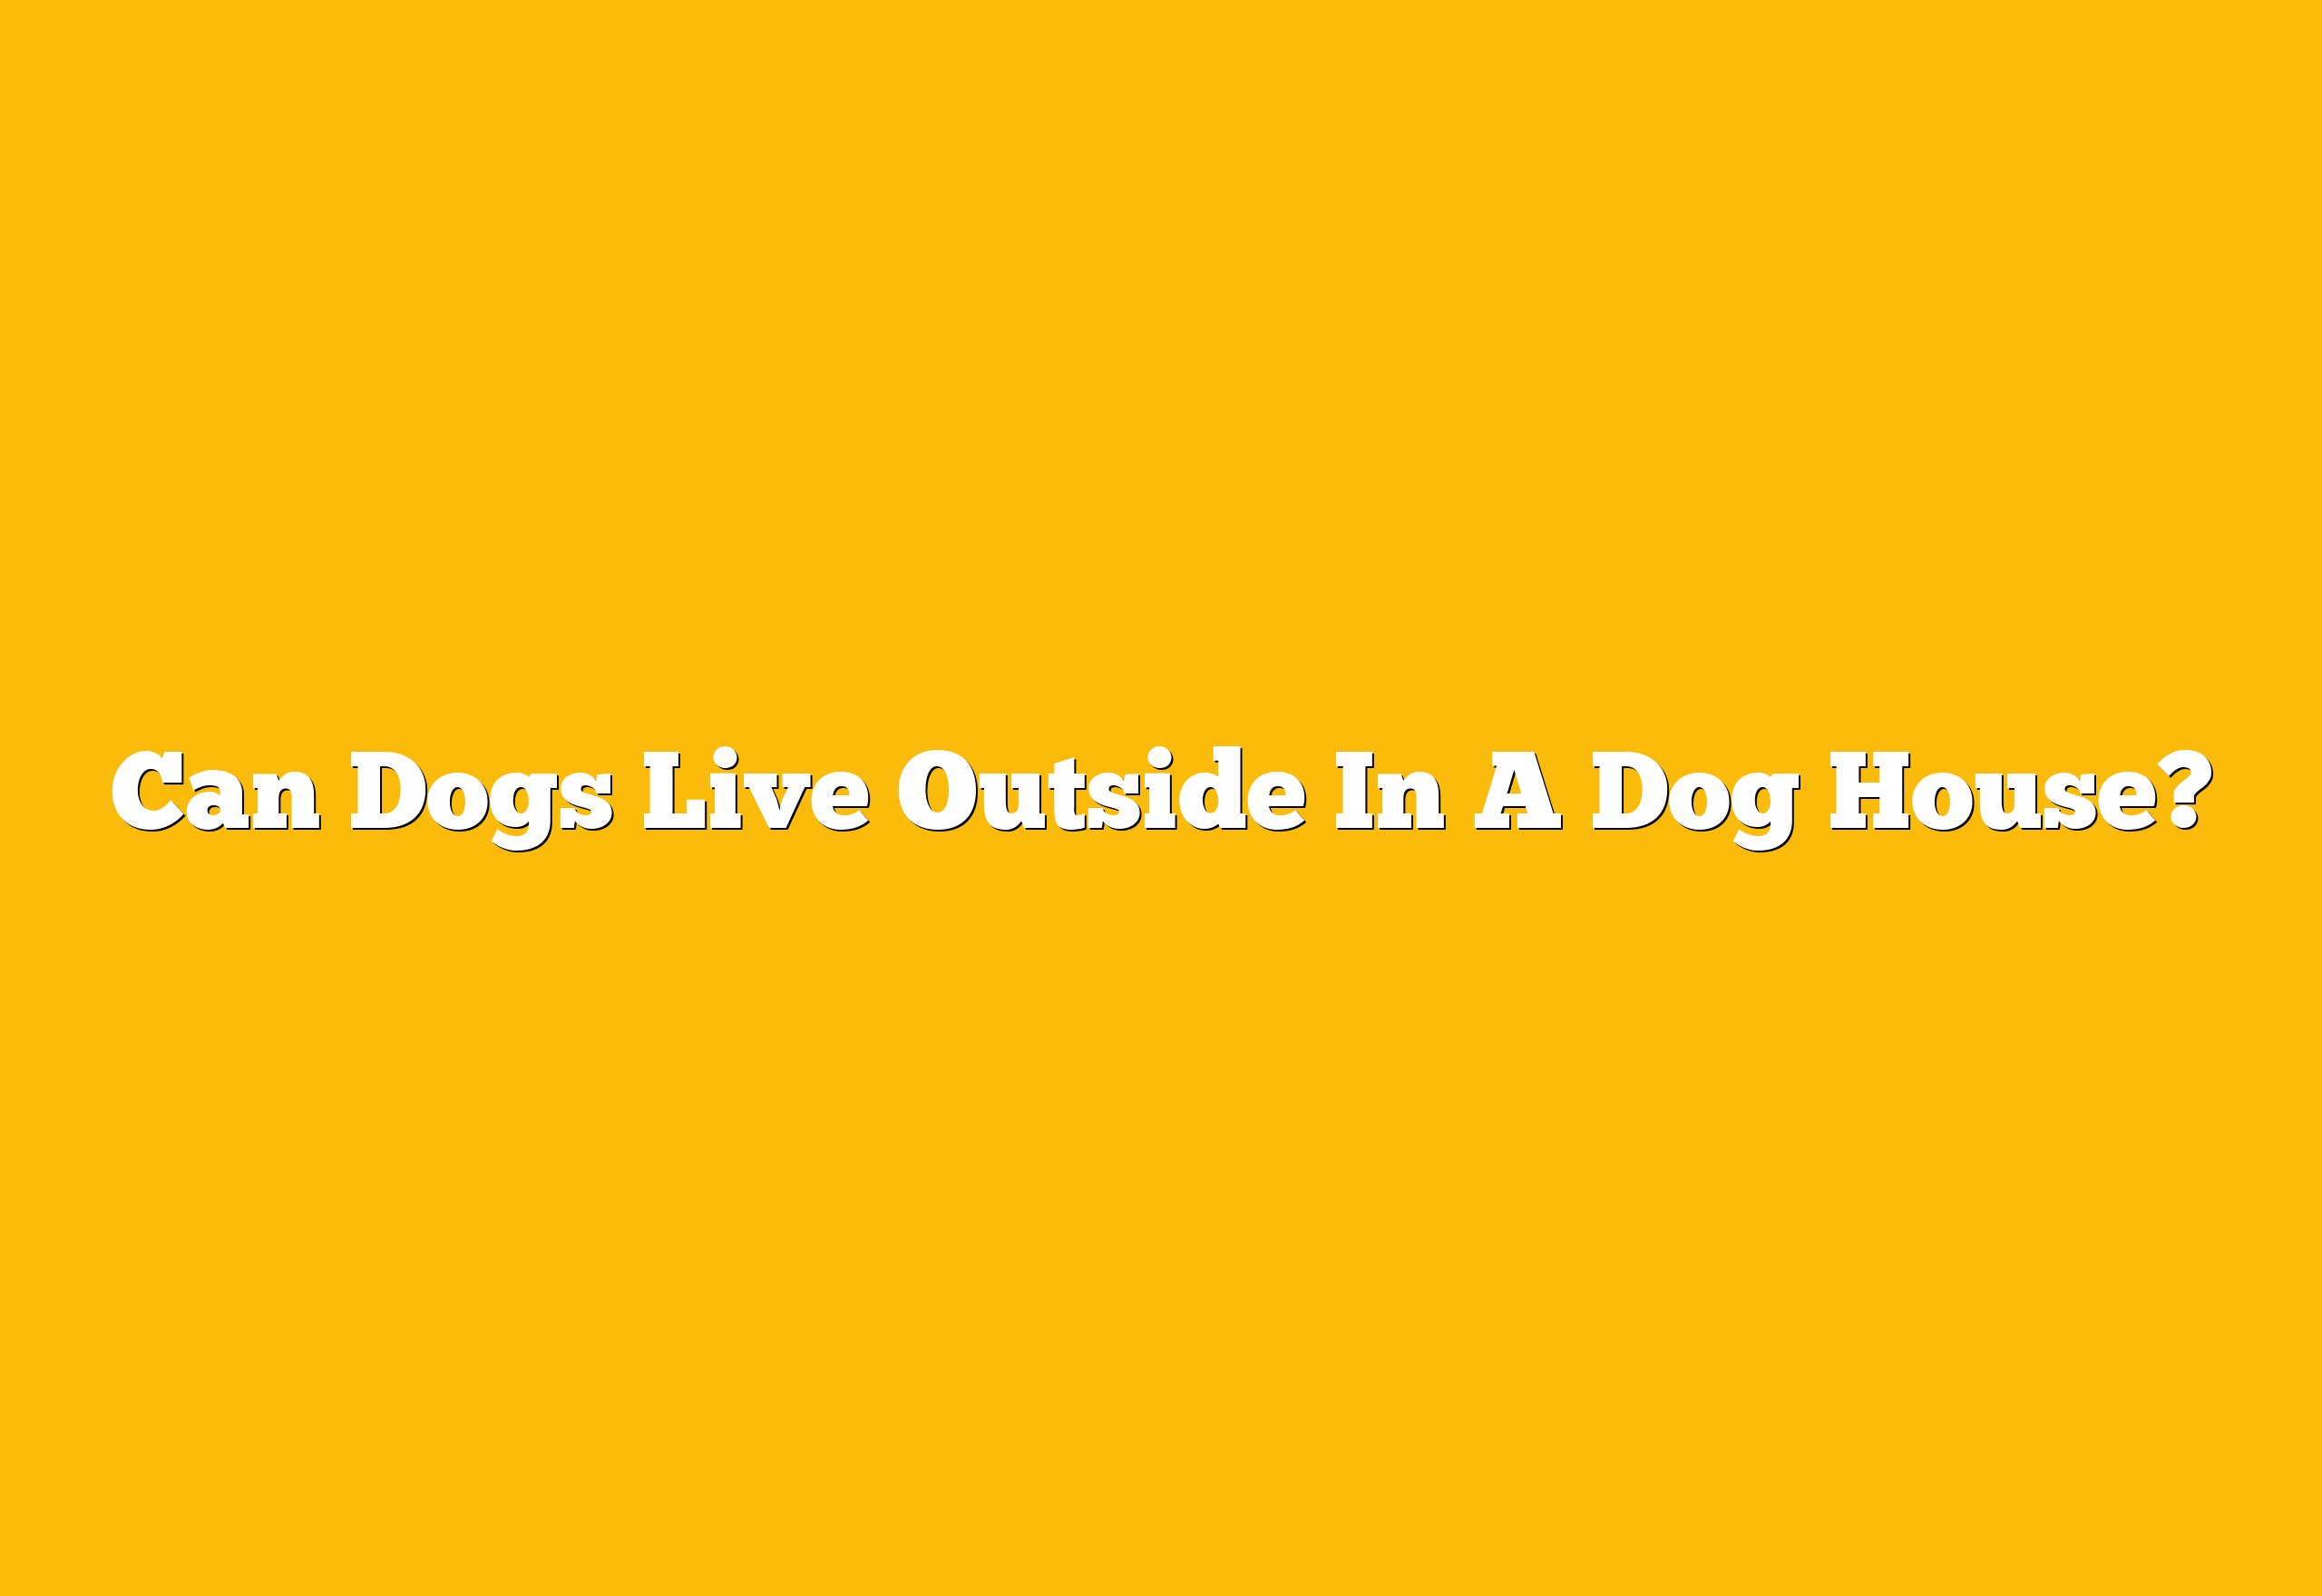 Can Dogs Live Outside In A Dog House?